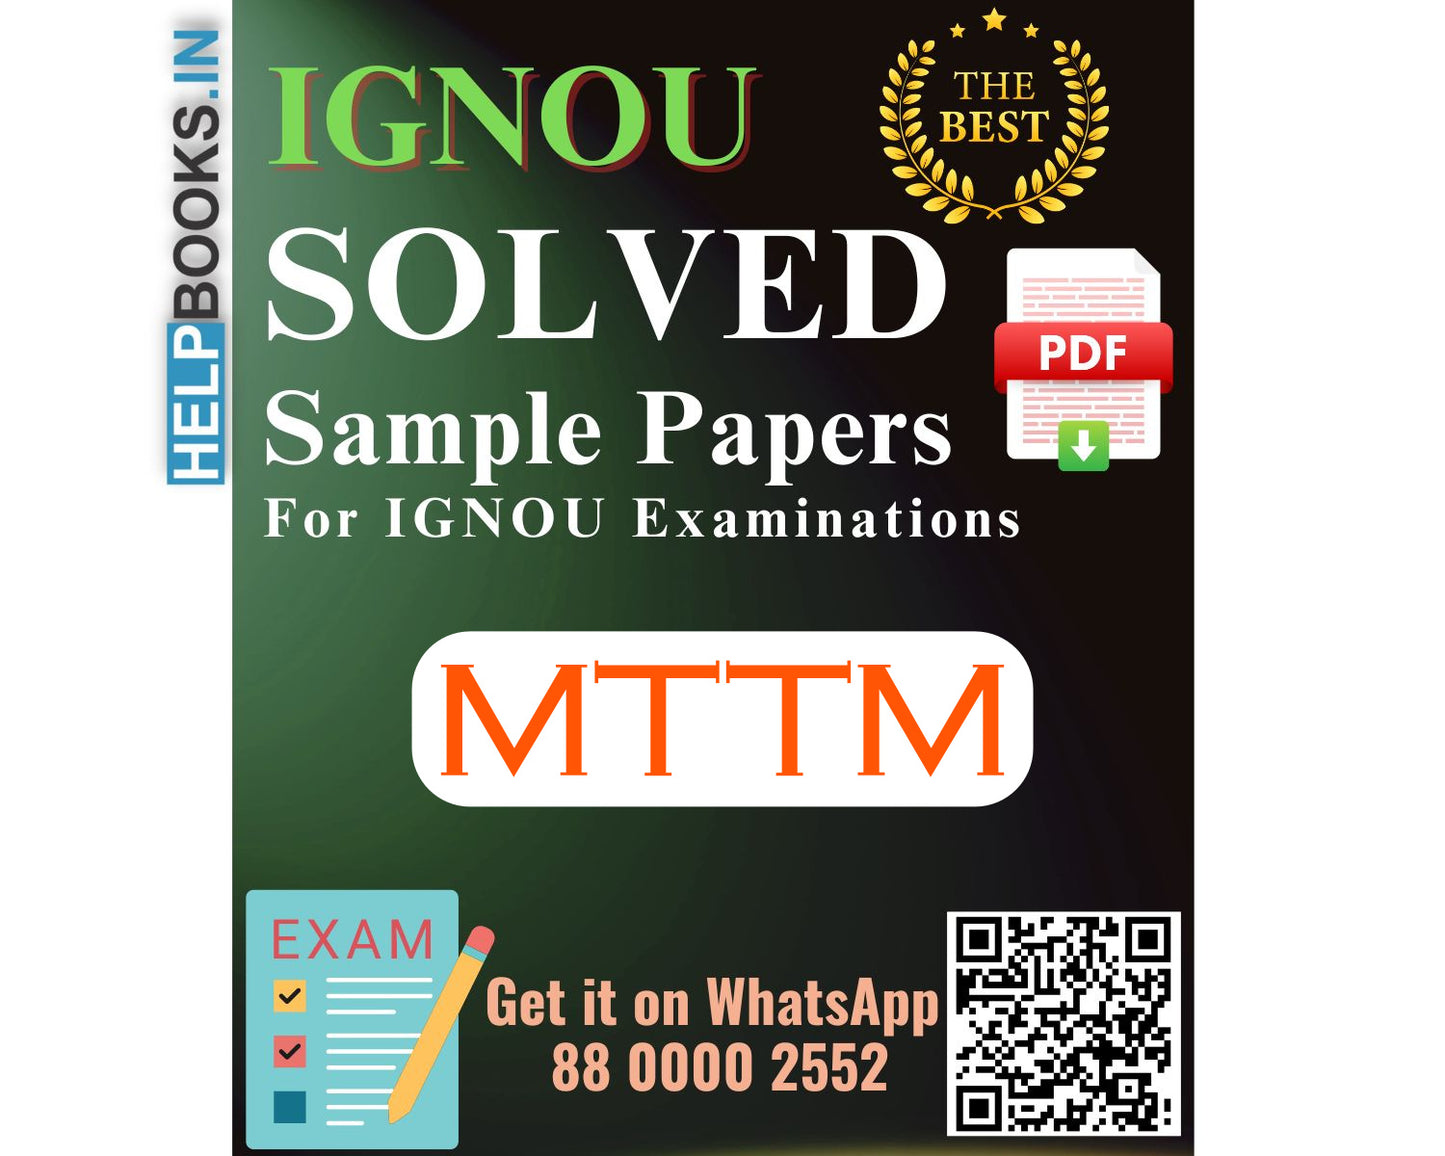 IGNOU Master of Tourism and Travel Management (MTTM) | Solved Sample Papers for Exams